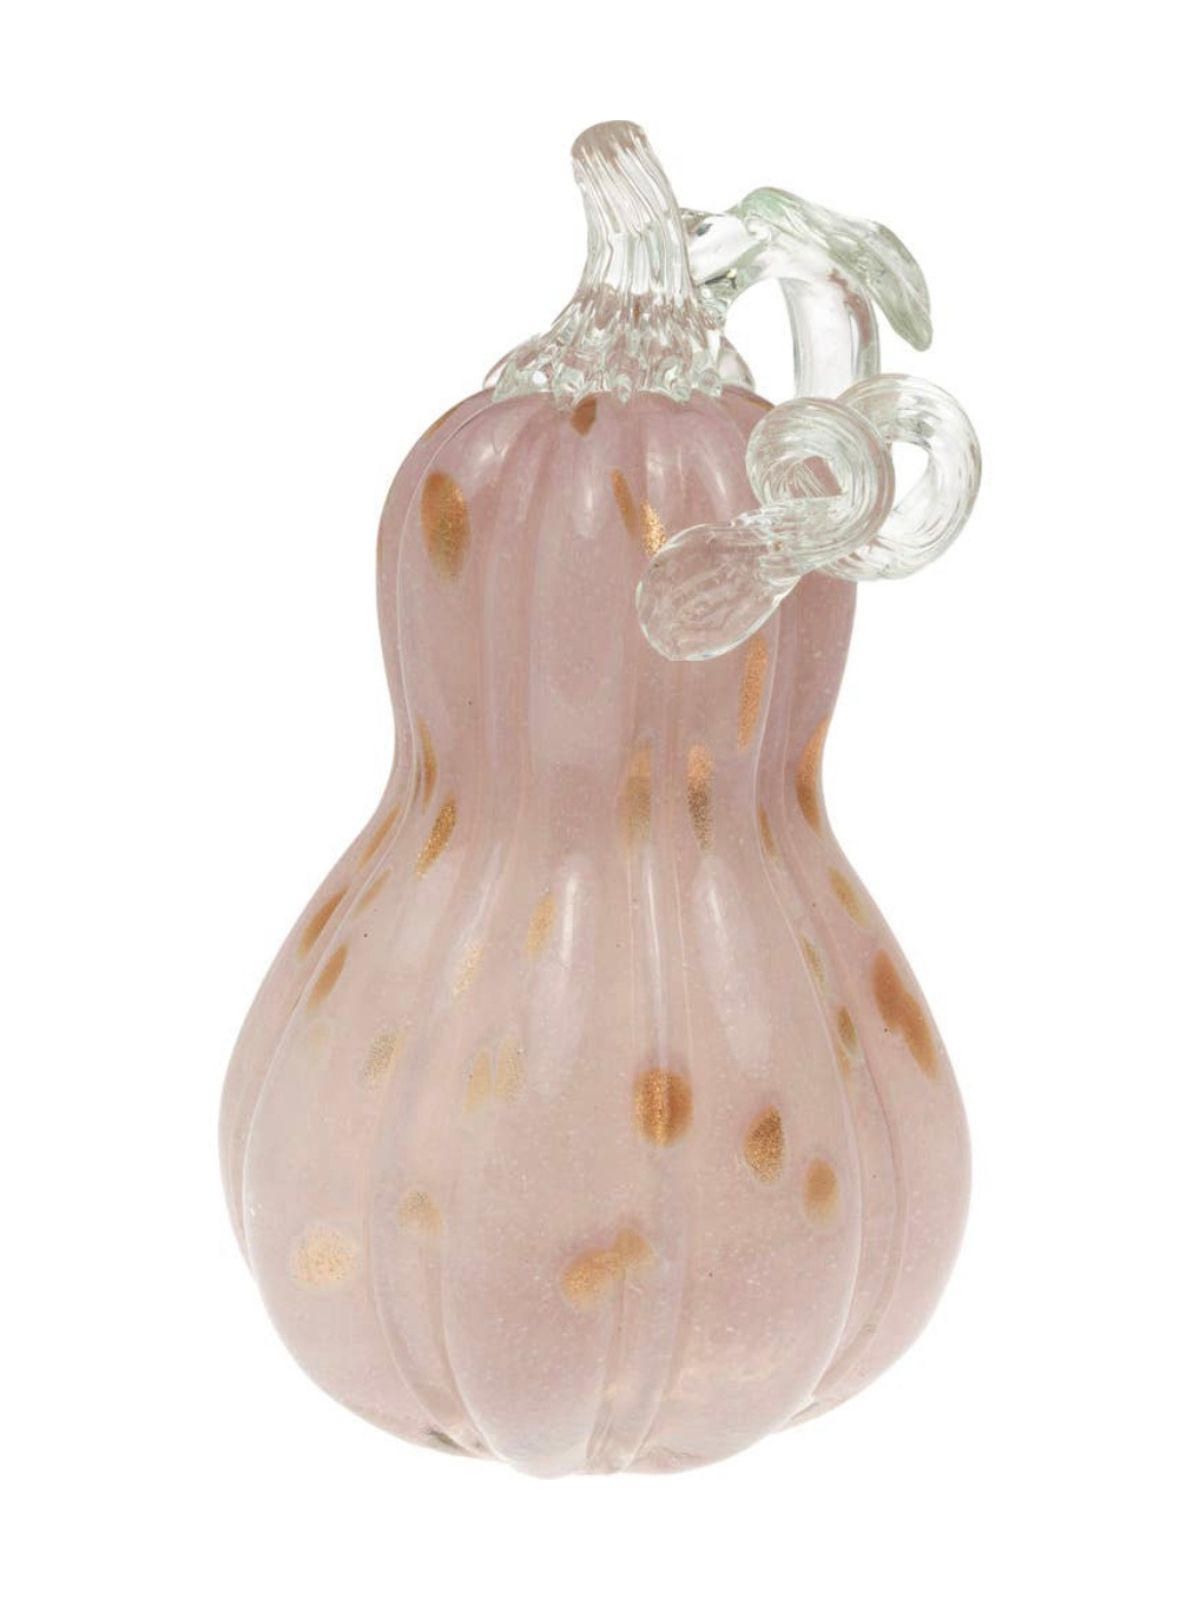 This Pink & Gold Glass Pumpkin is perfect for decorating your home during fall season! This hand-blown glass pumpkin features an abstract Pink and gold pattern with a curly clear stem.